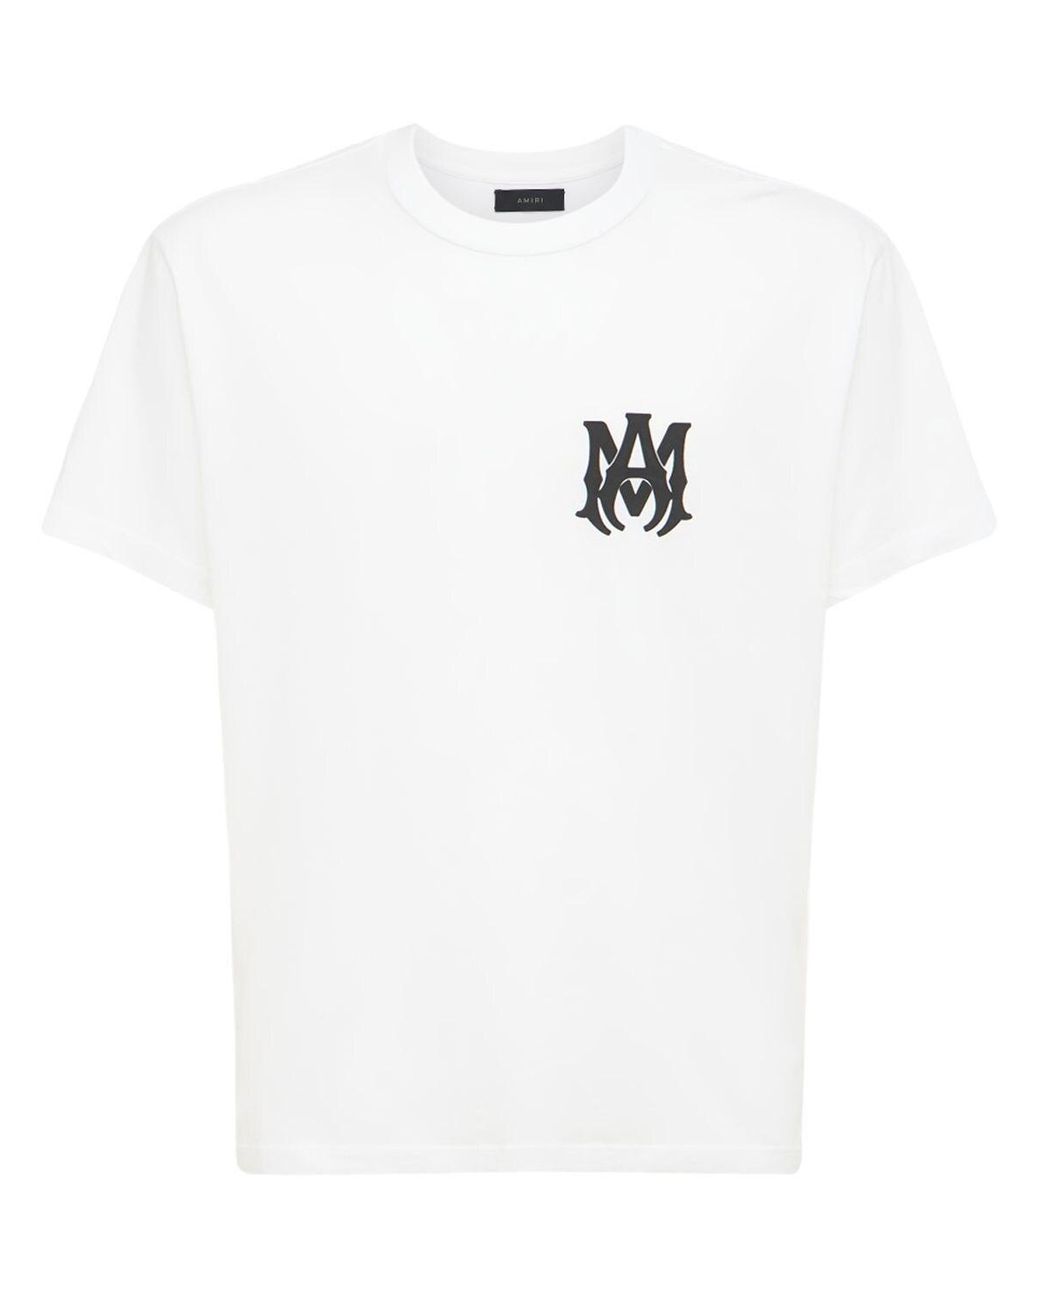 Amiri Ma Cotton Jersey T-shirt in White for Men - Lyst